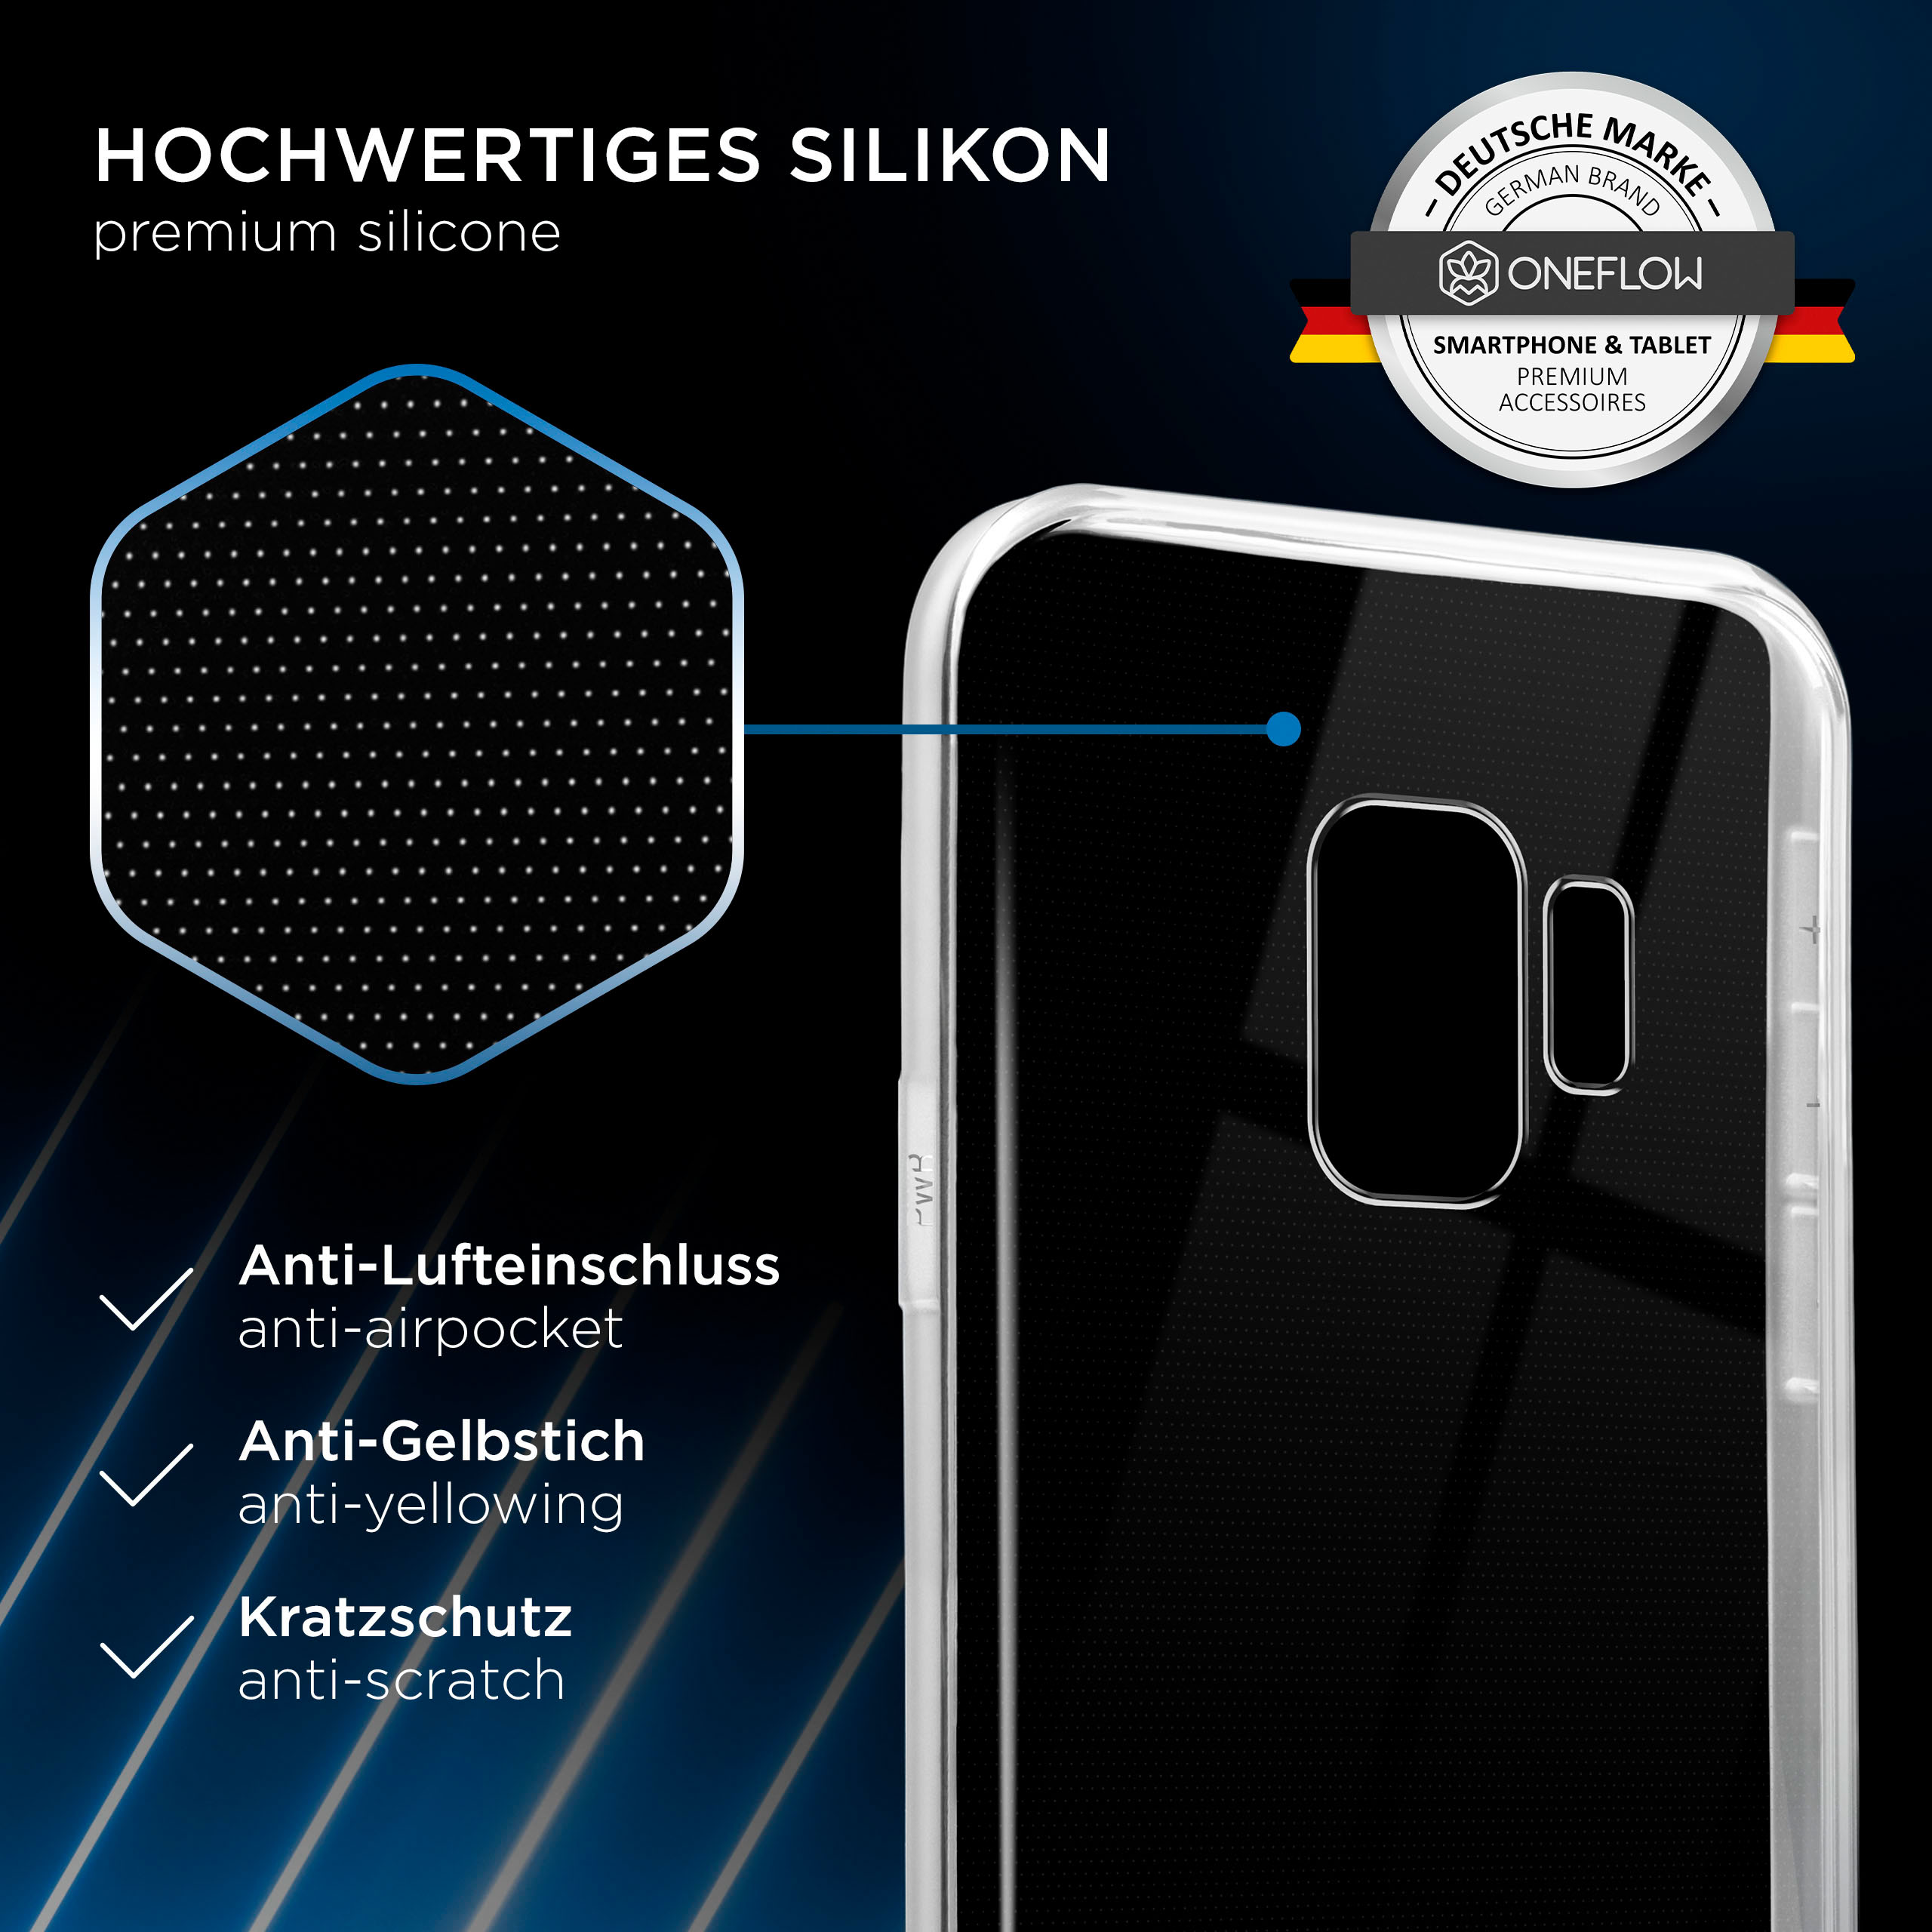 Samsung, Galaxy Backcover, ONEFLOW Clear Crystal-Clear S9, Case,